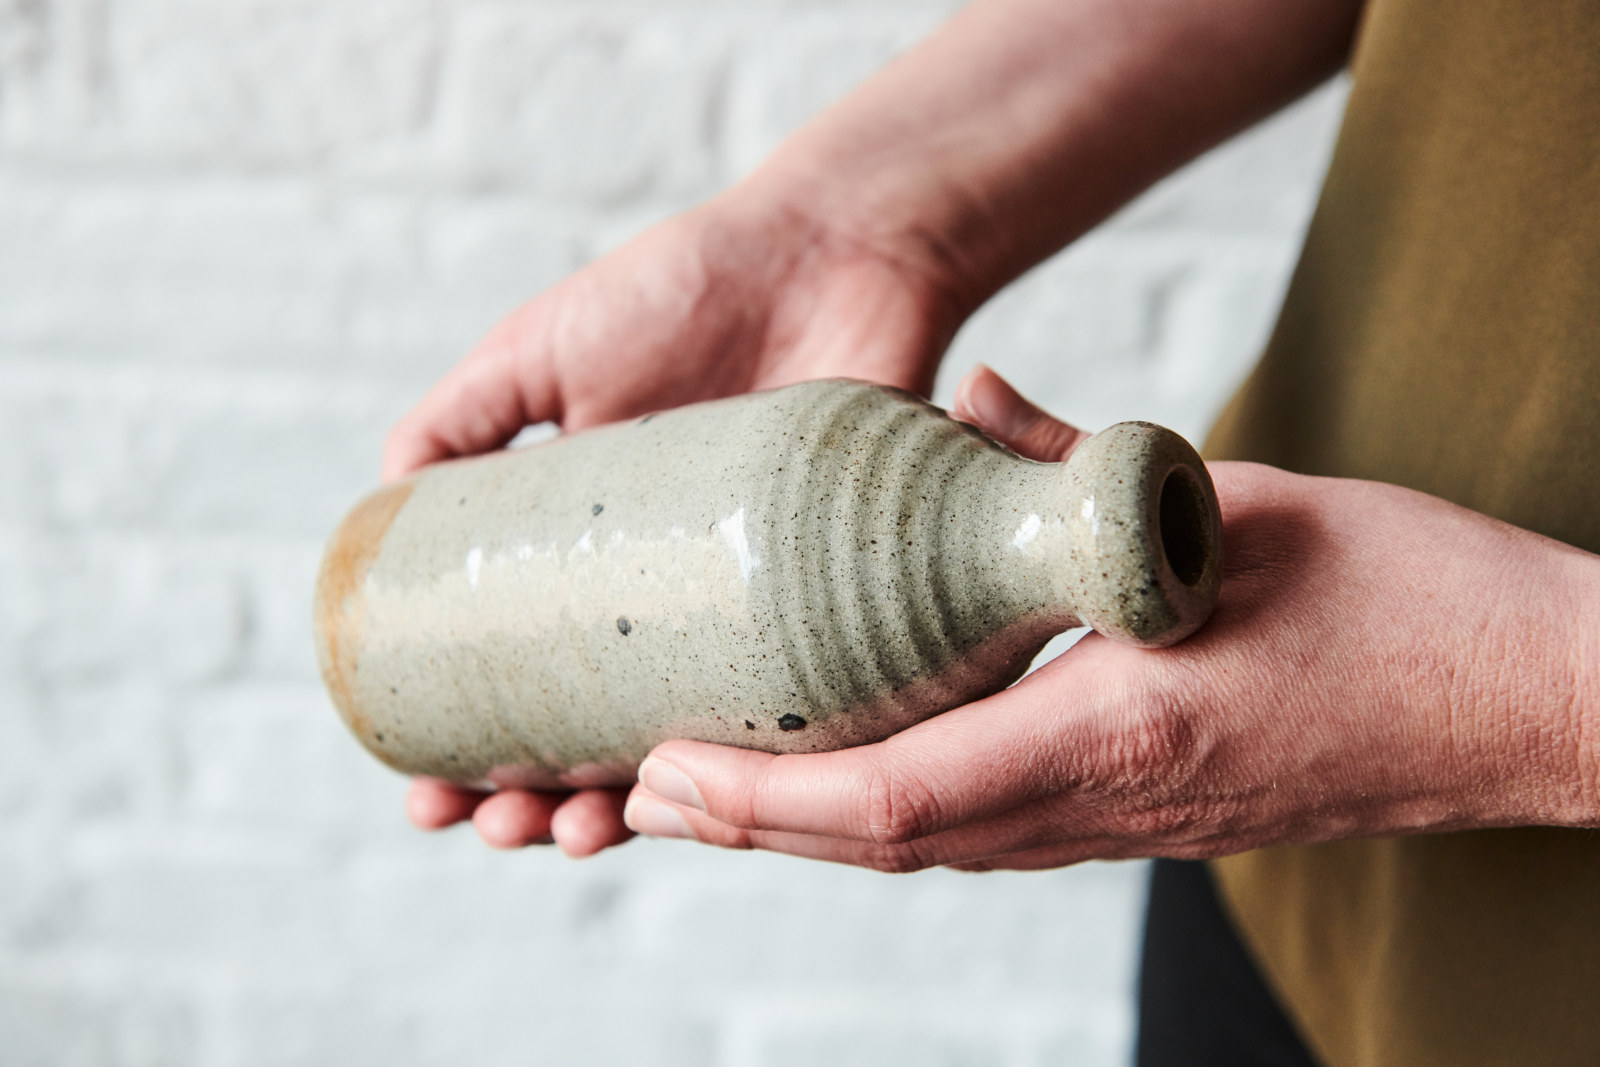 Close up of a ceramic bottle. This item was featured in one of our virtual excursions.